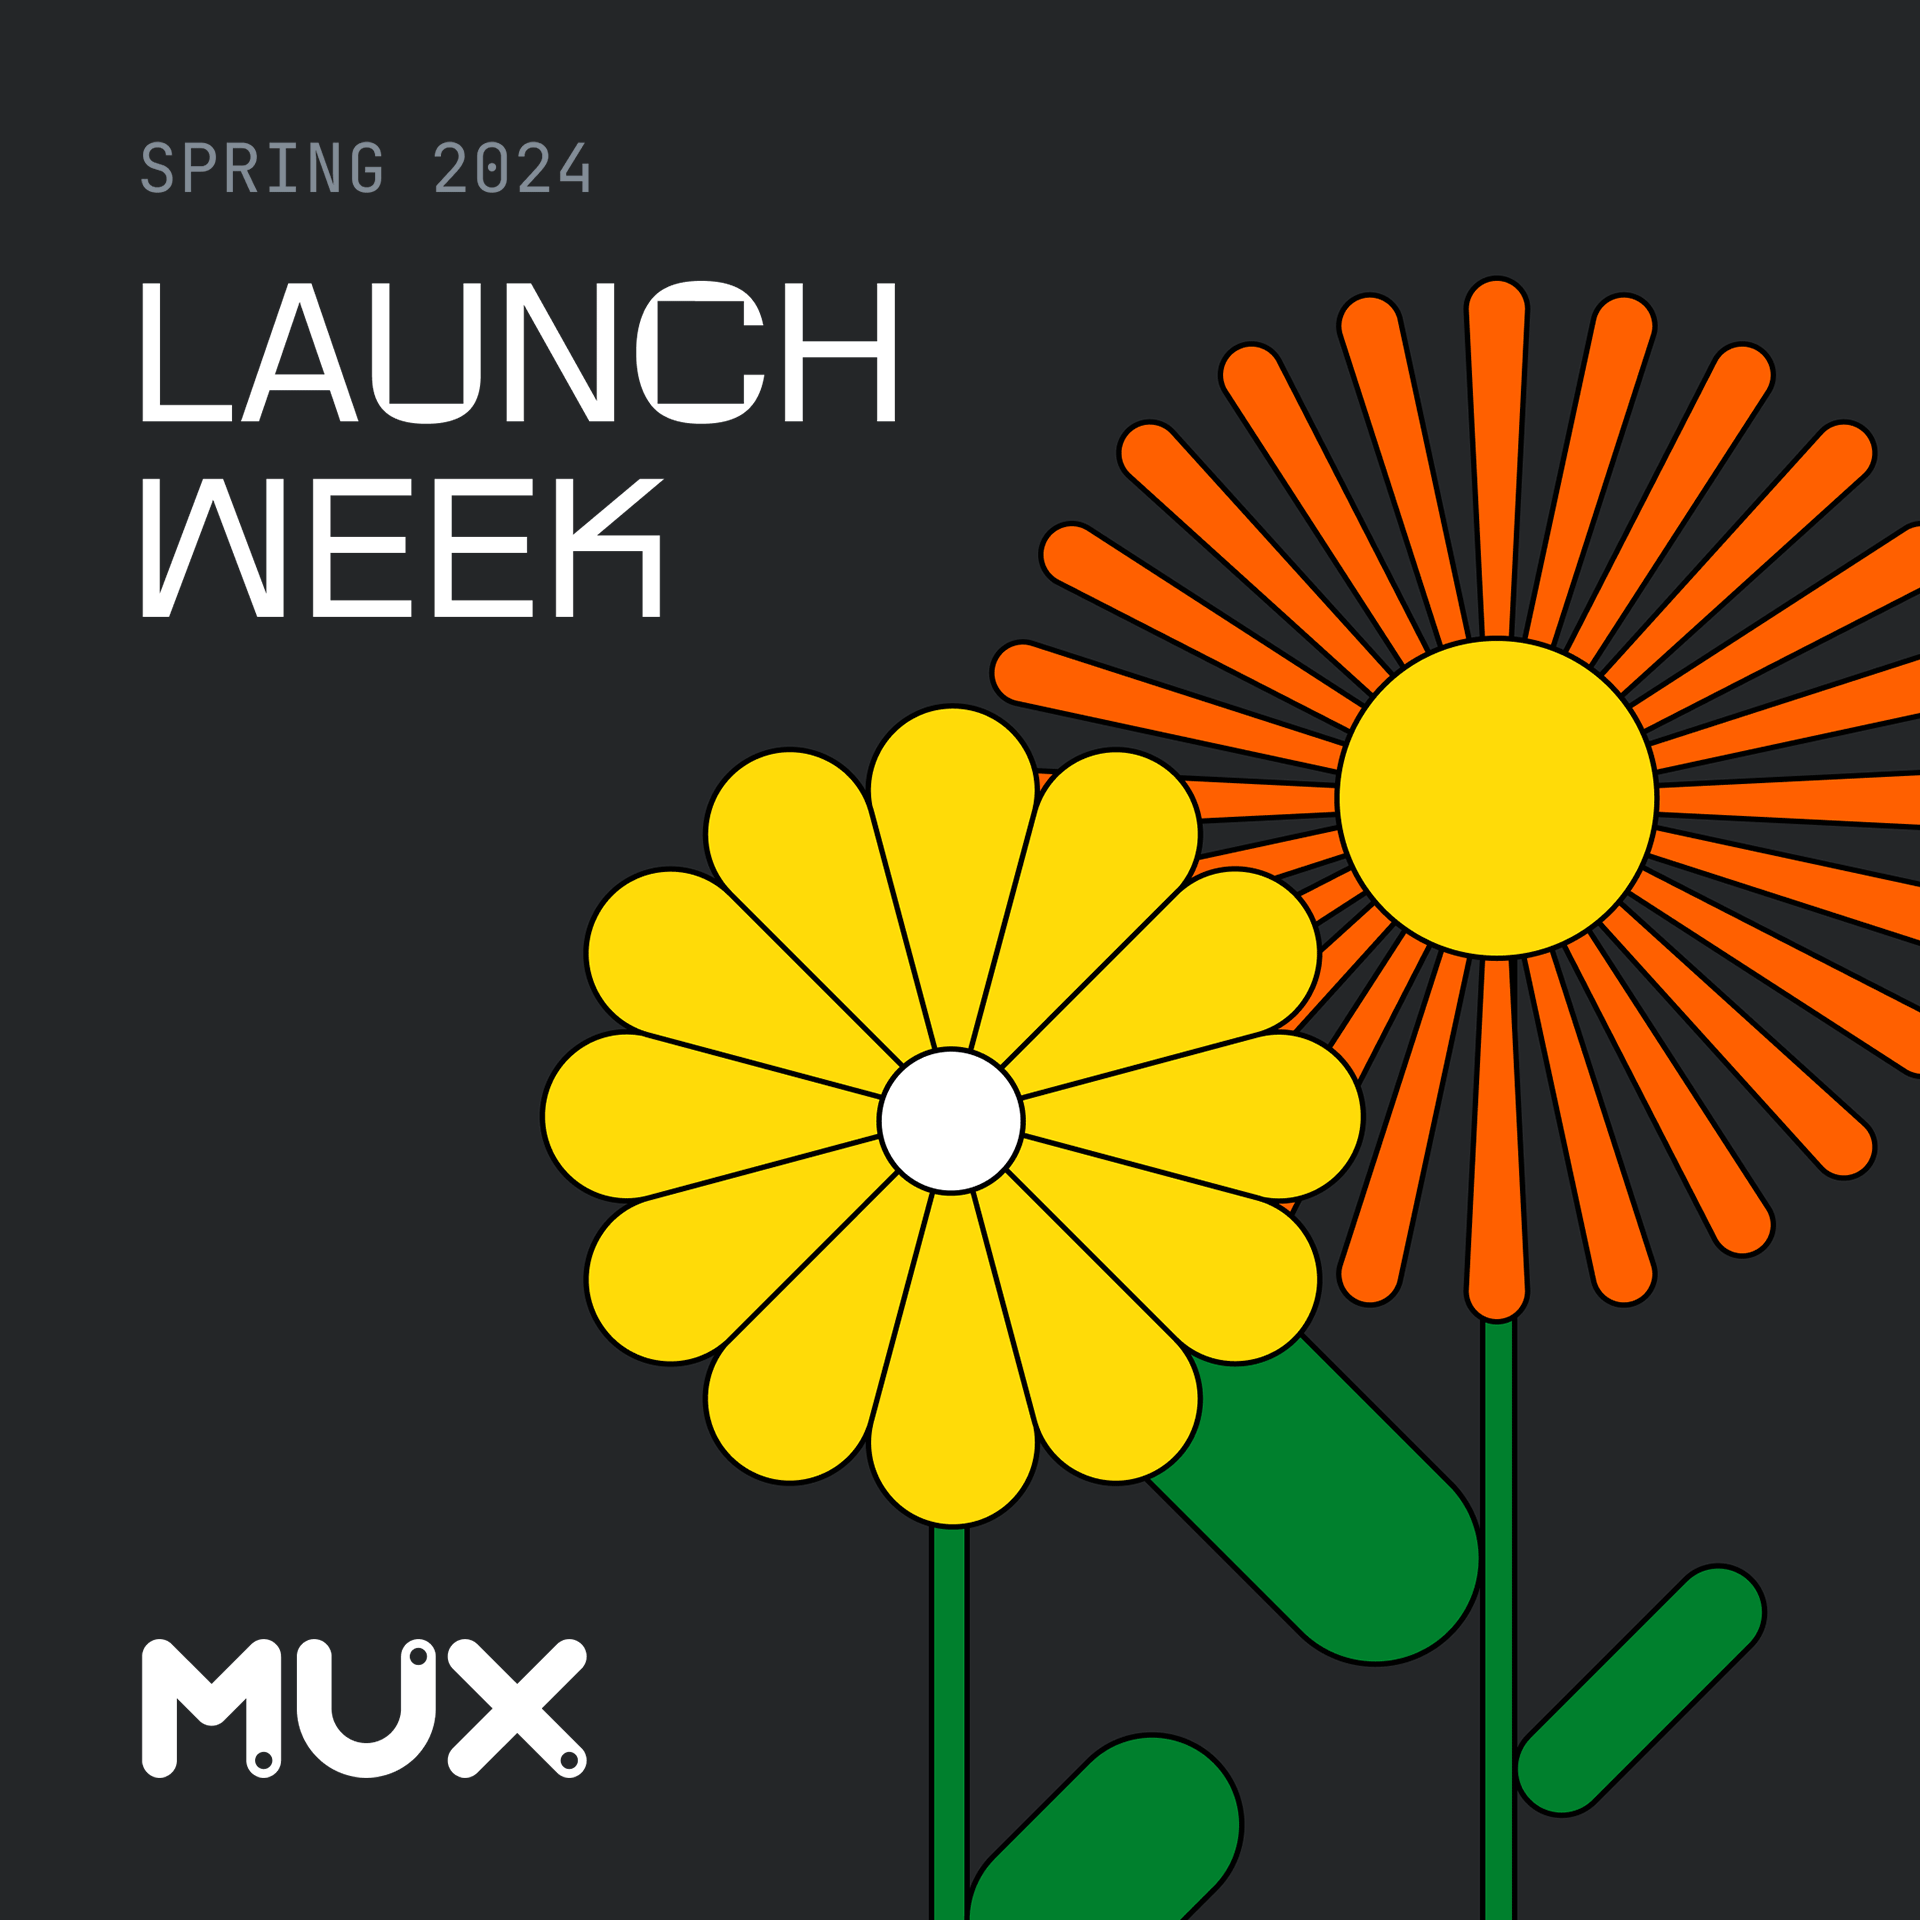 A graphic image with a black background featuring stylized flowers in bold colors, one in yellow and one in red, both with large circular centers. The text 'SPRING 2024 LAUNCH WEEK' is prominently displayed above the flowers. The Mux logo sits in the bottom left corner.